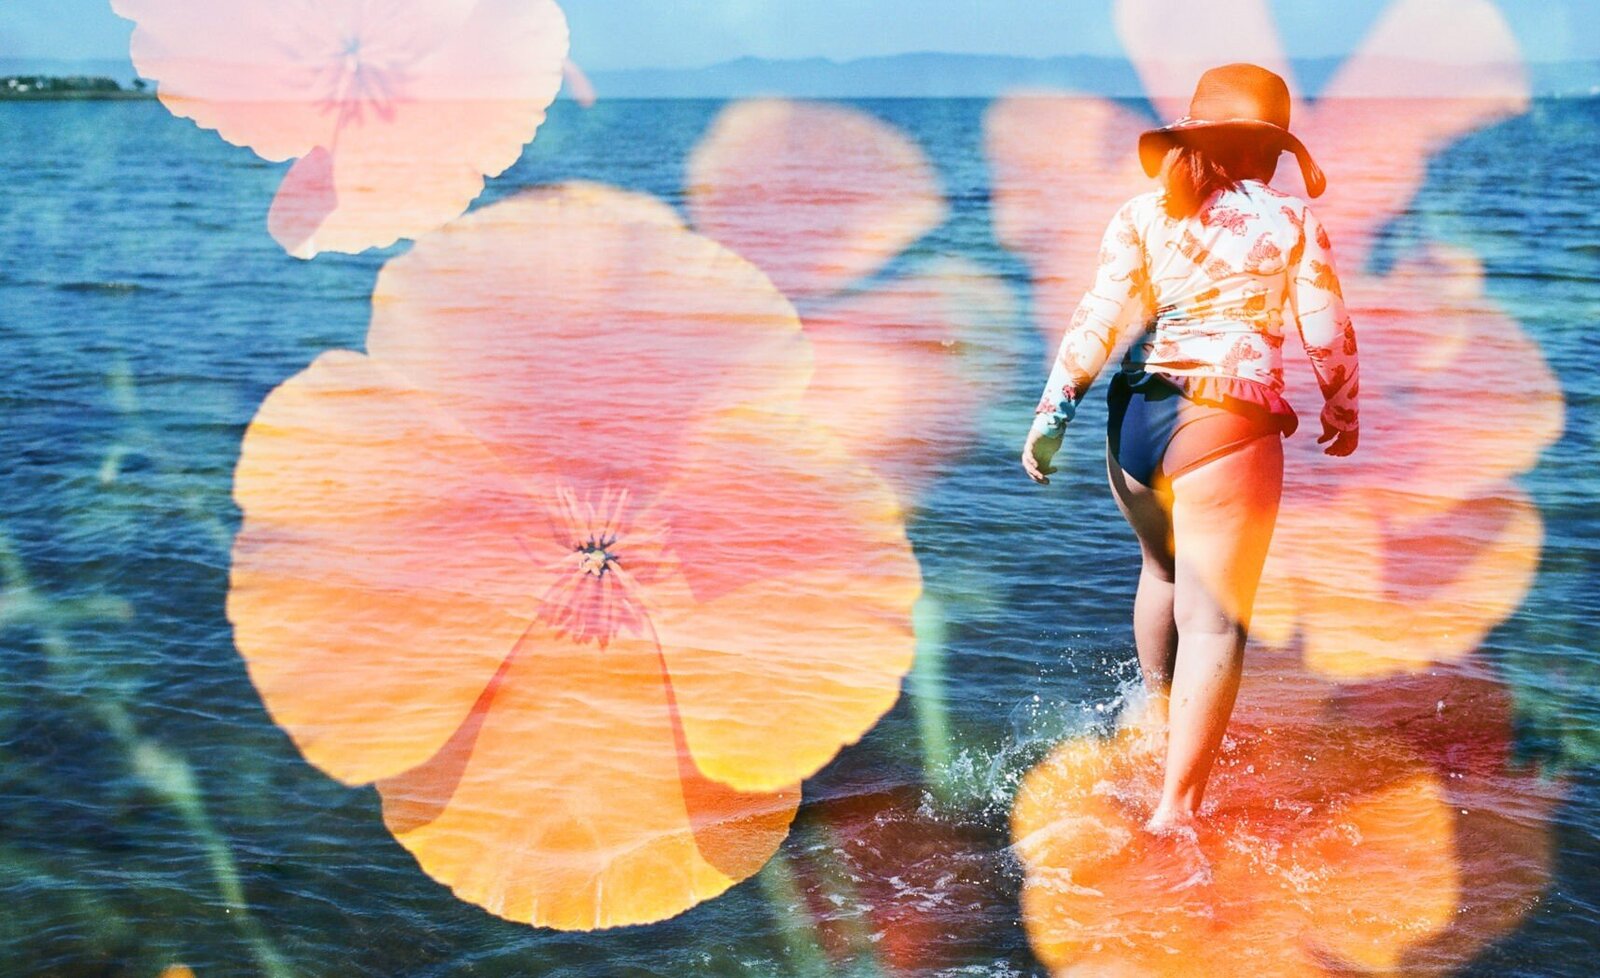 double exposure on film of orange california poppies with a girl walking through shallow water in the San Francisco Bay